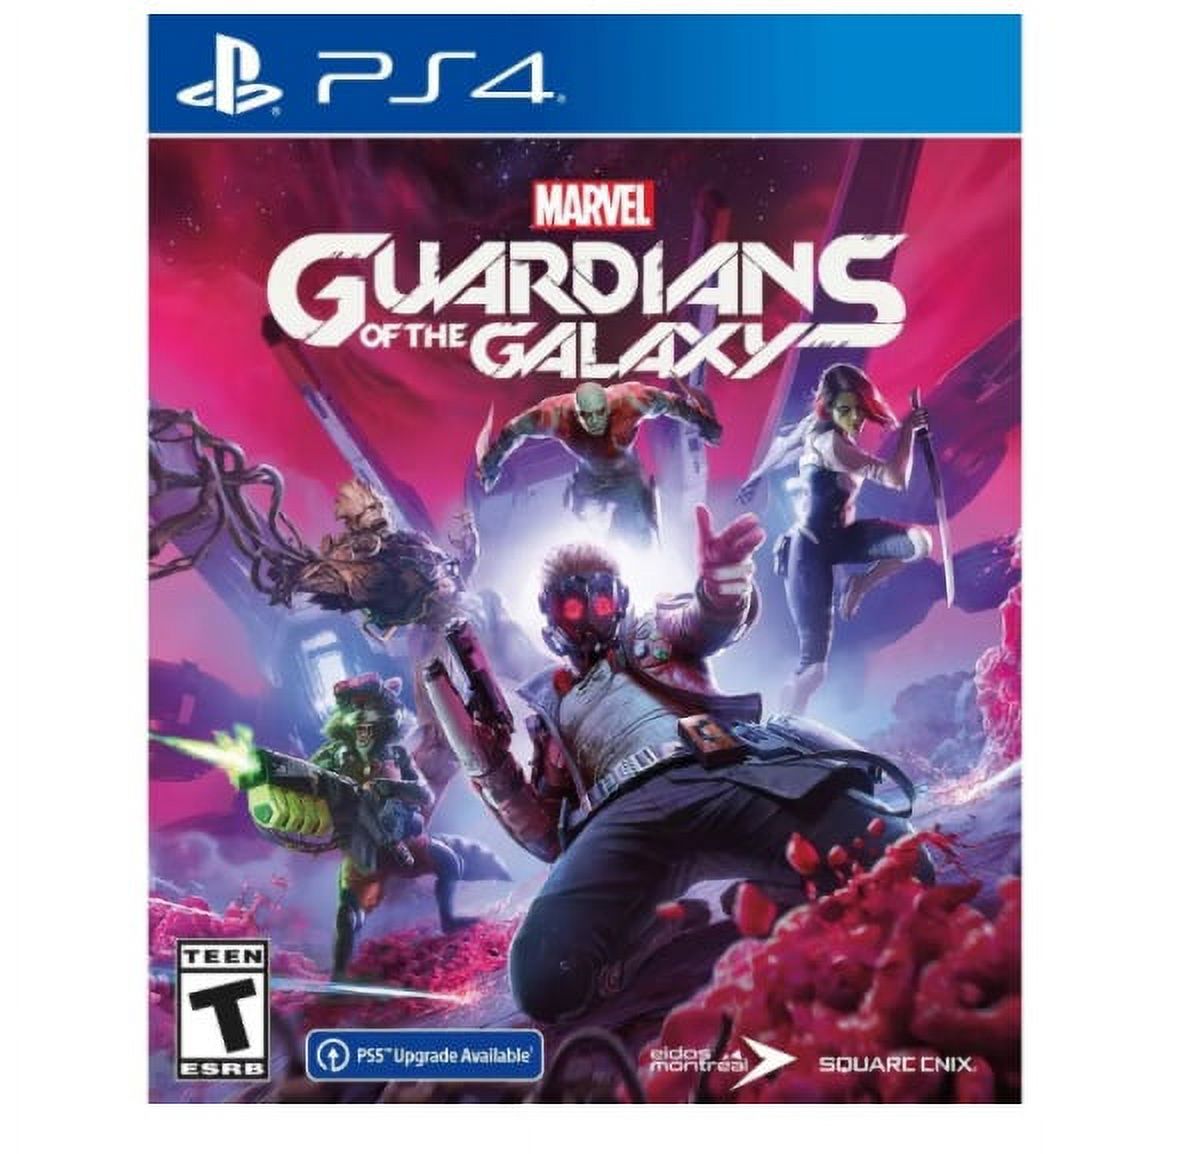 Marvel’s Guardians of the Galaxy, Square Enix, PlayStation 4 - image 1 of 7